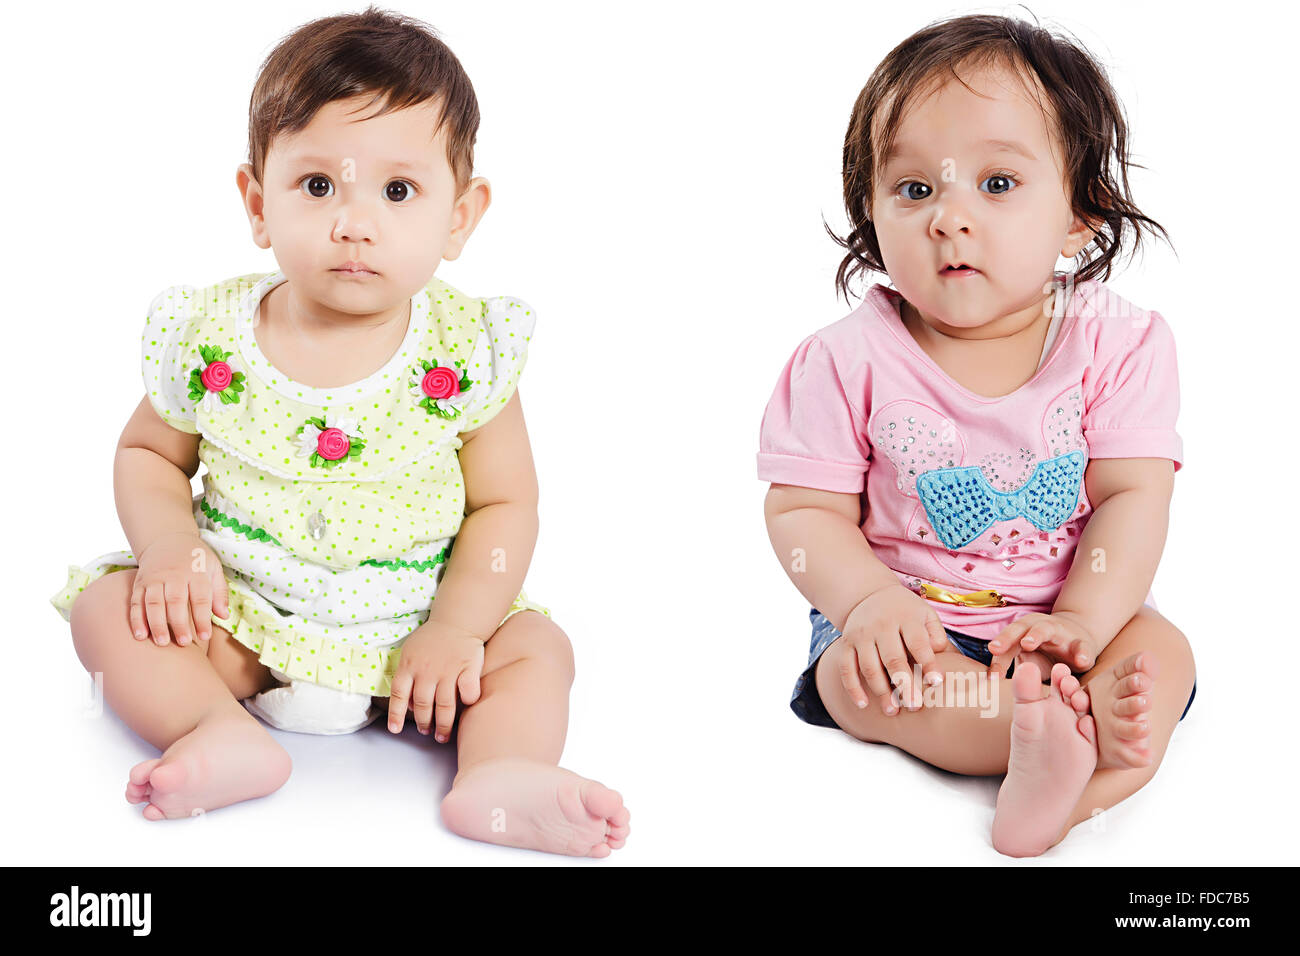 2 people Kids Babies Friends Girls only Sitting Stock Photo